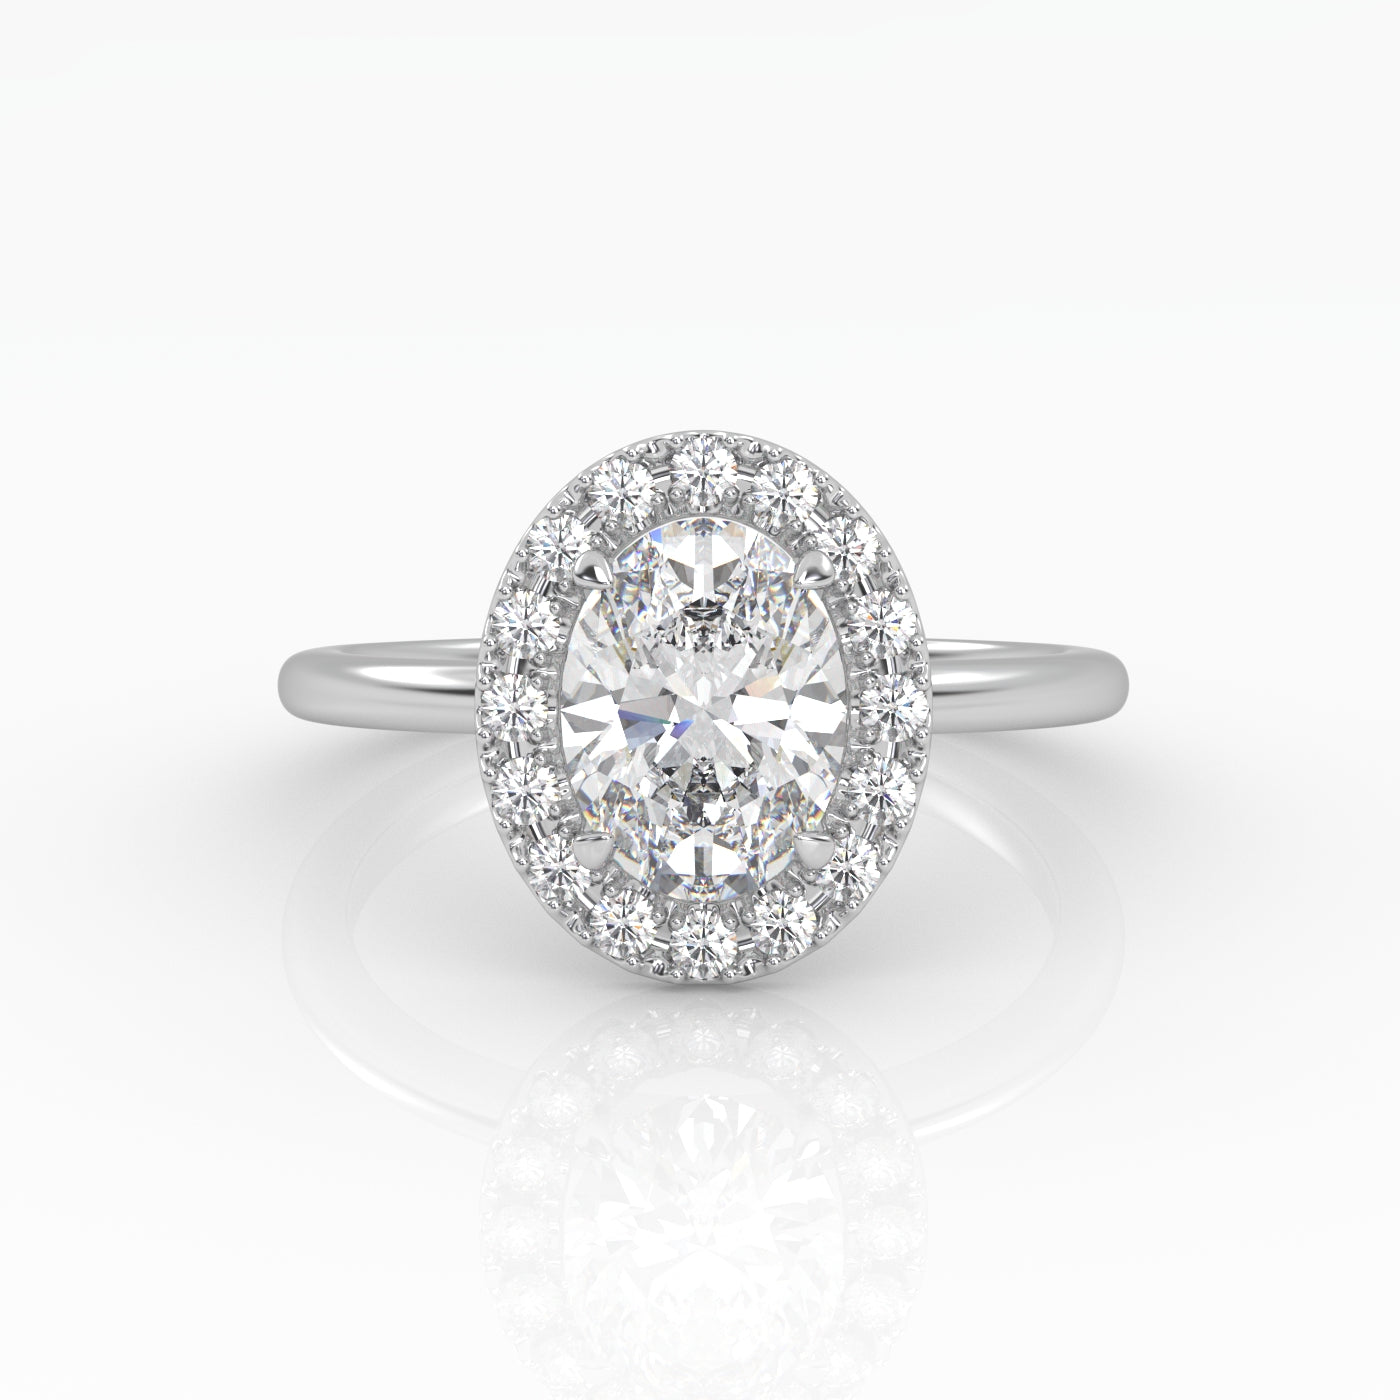 The Oval Solitaire with Halo